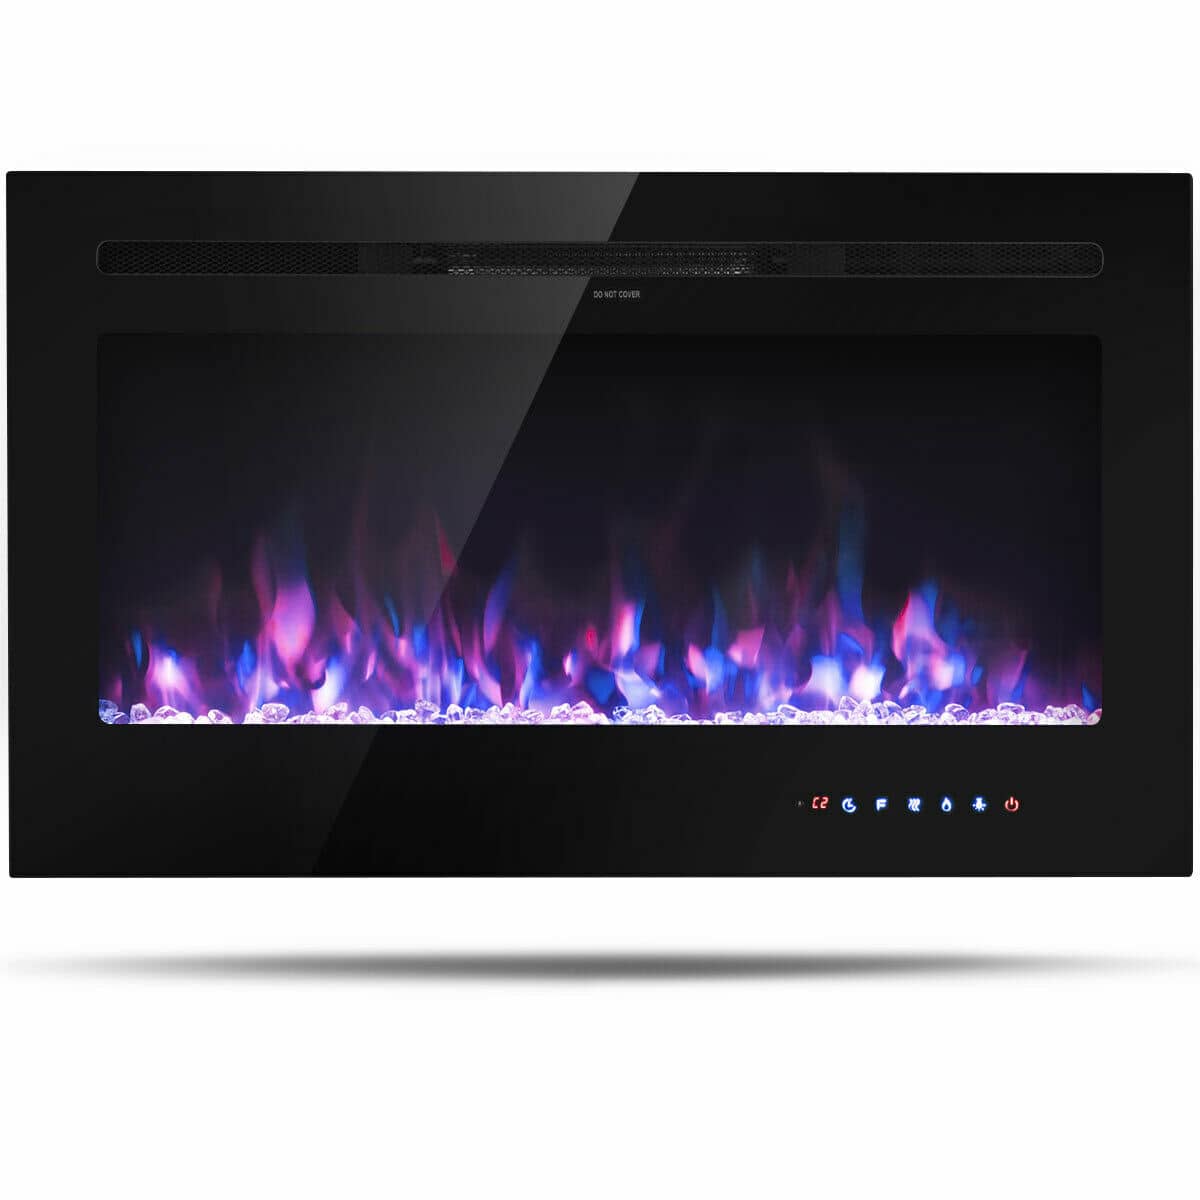 CASAINC 36 Inch Electric Wall Mounted Ultrathin Fireplace with Touch Screen and Timer-Casainc Canada